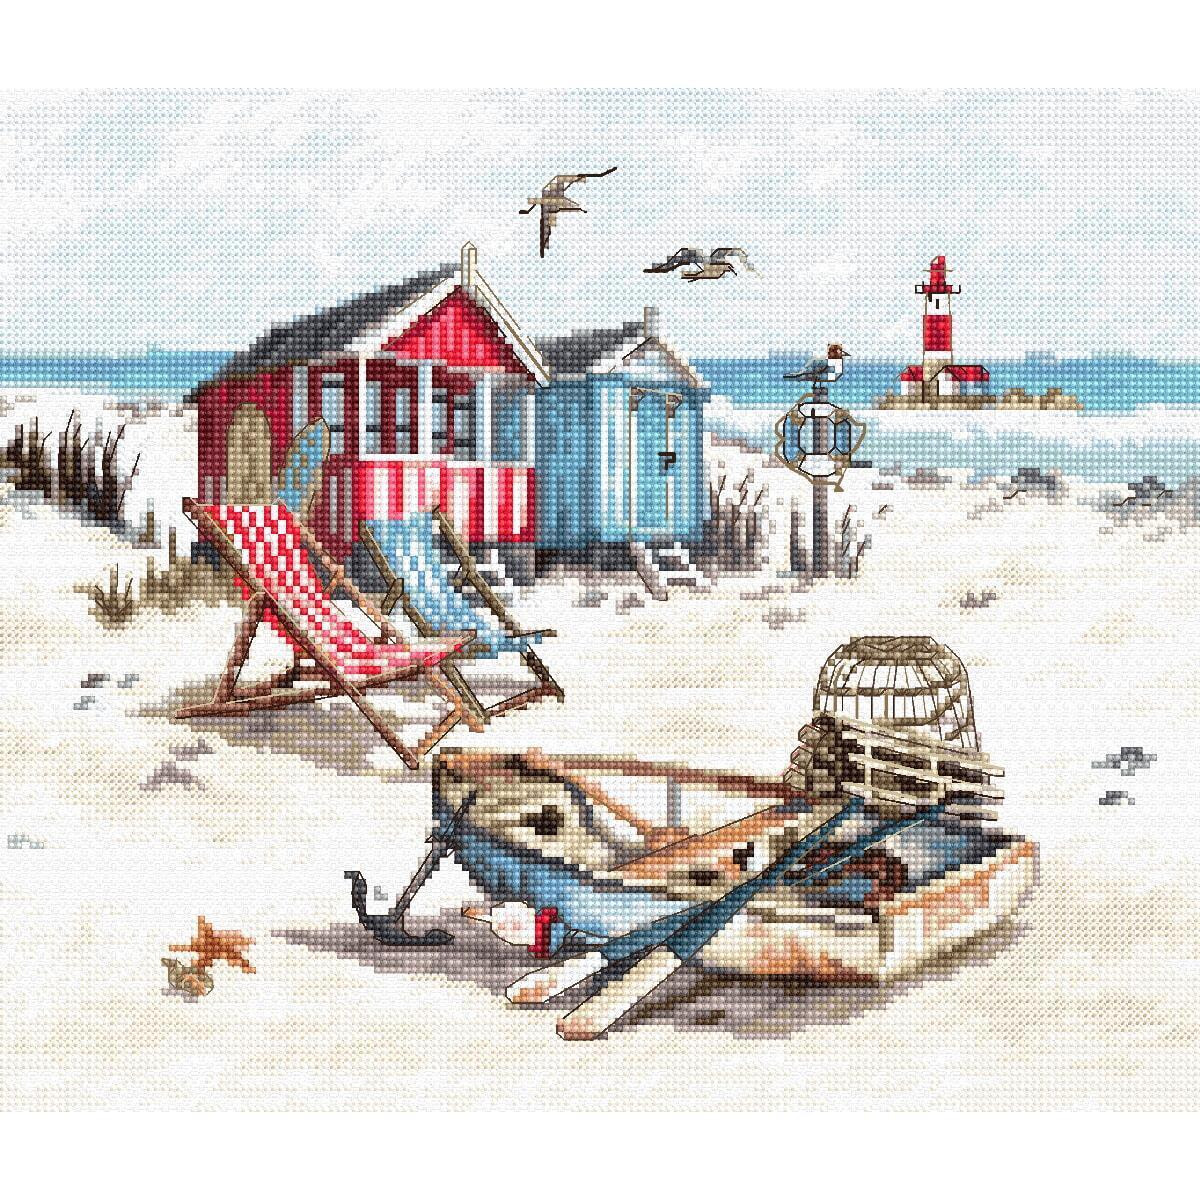 A beach scene shows colorful beach huts and deck chairs...